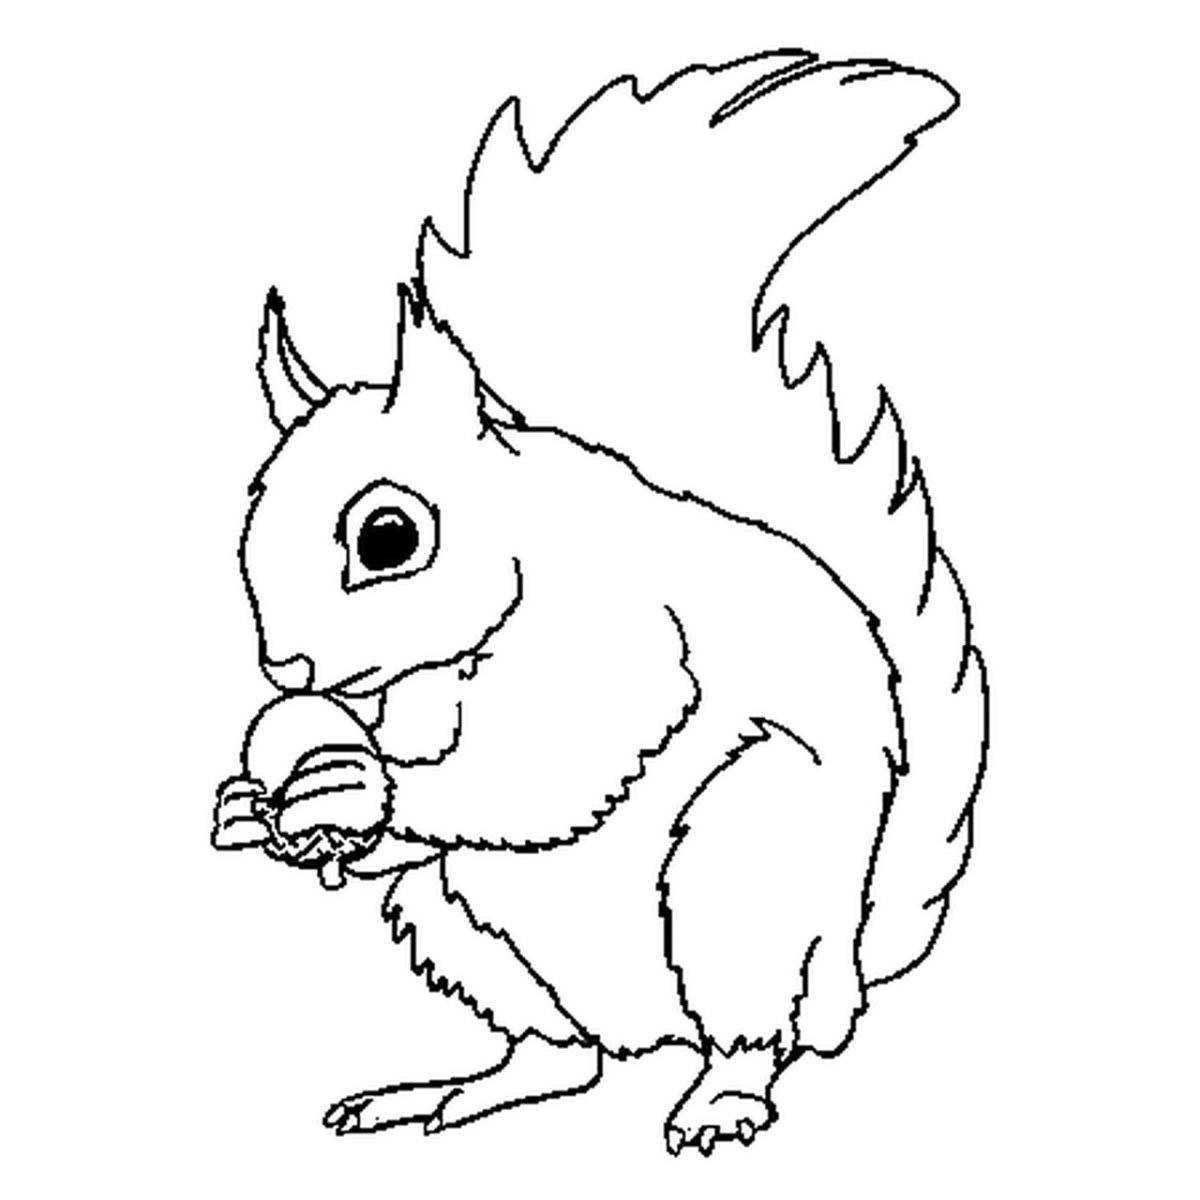 Coloring squirrel in the hollow